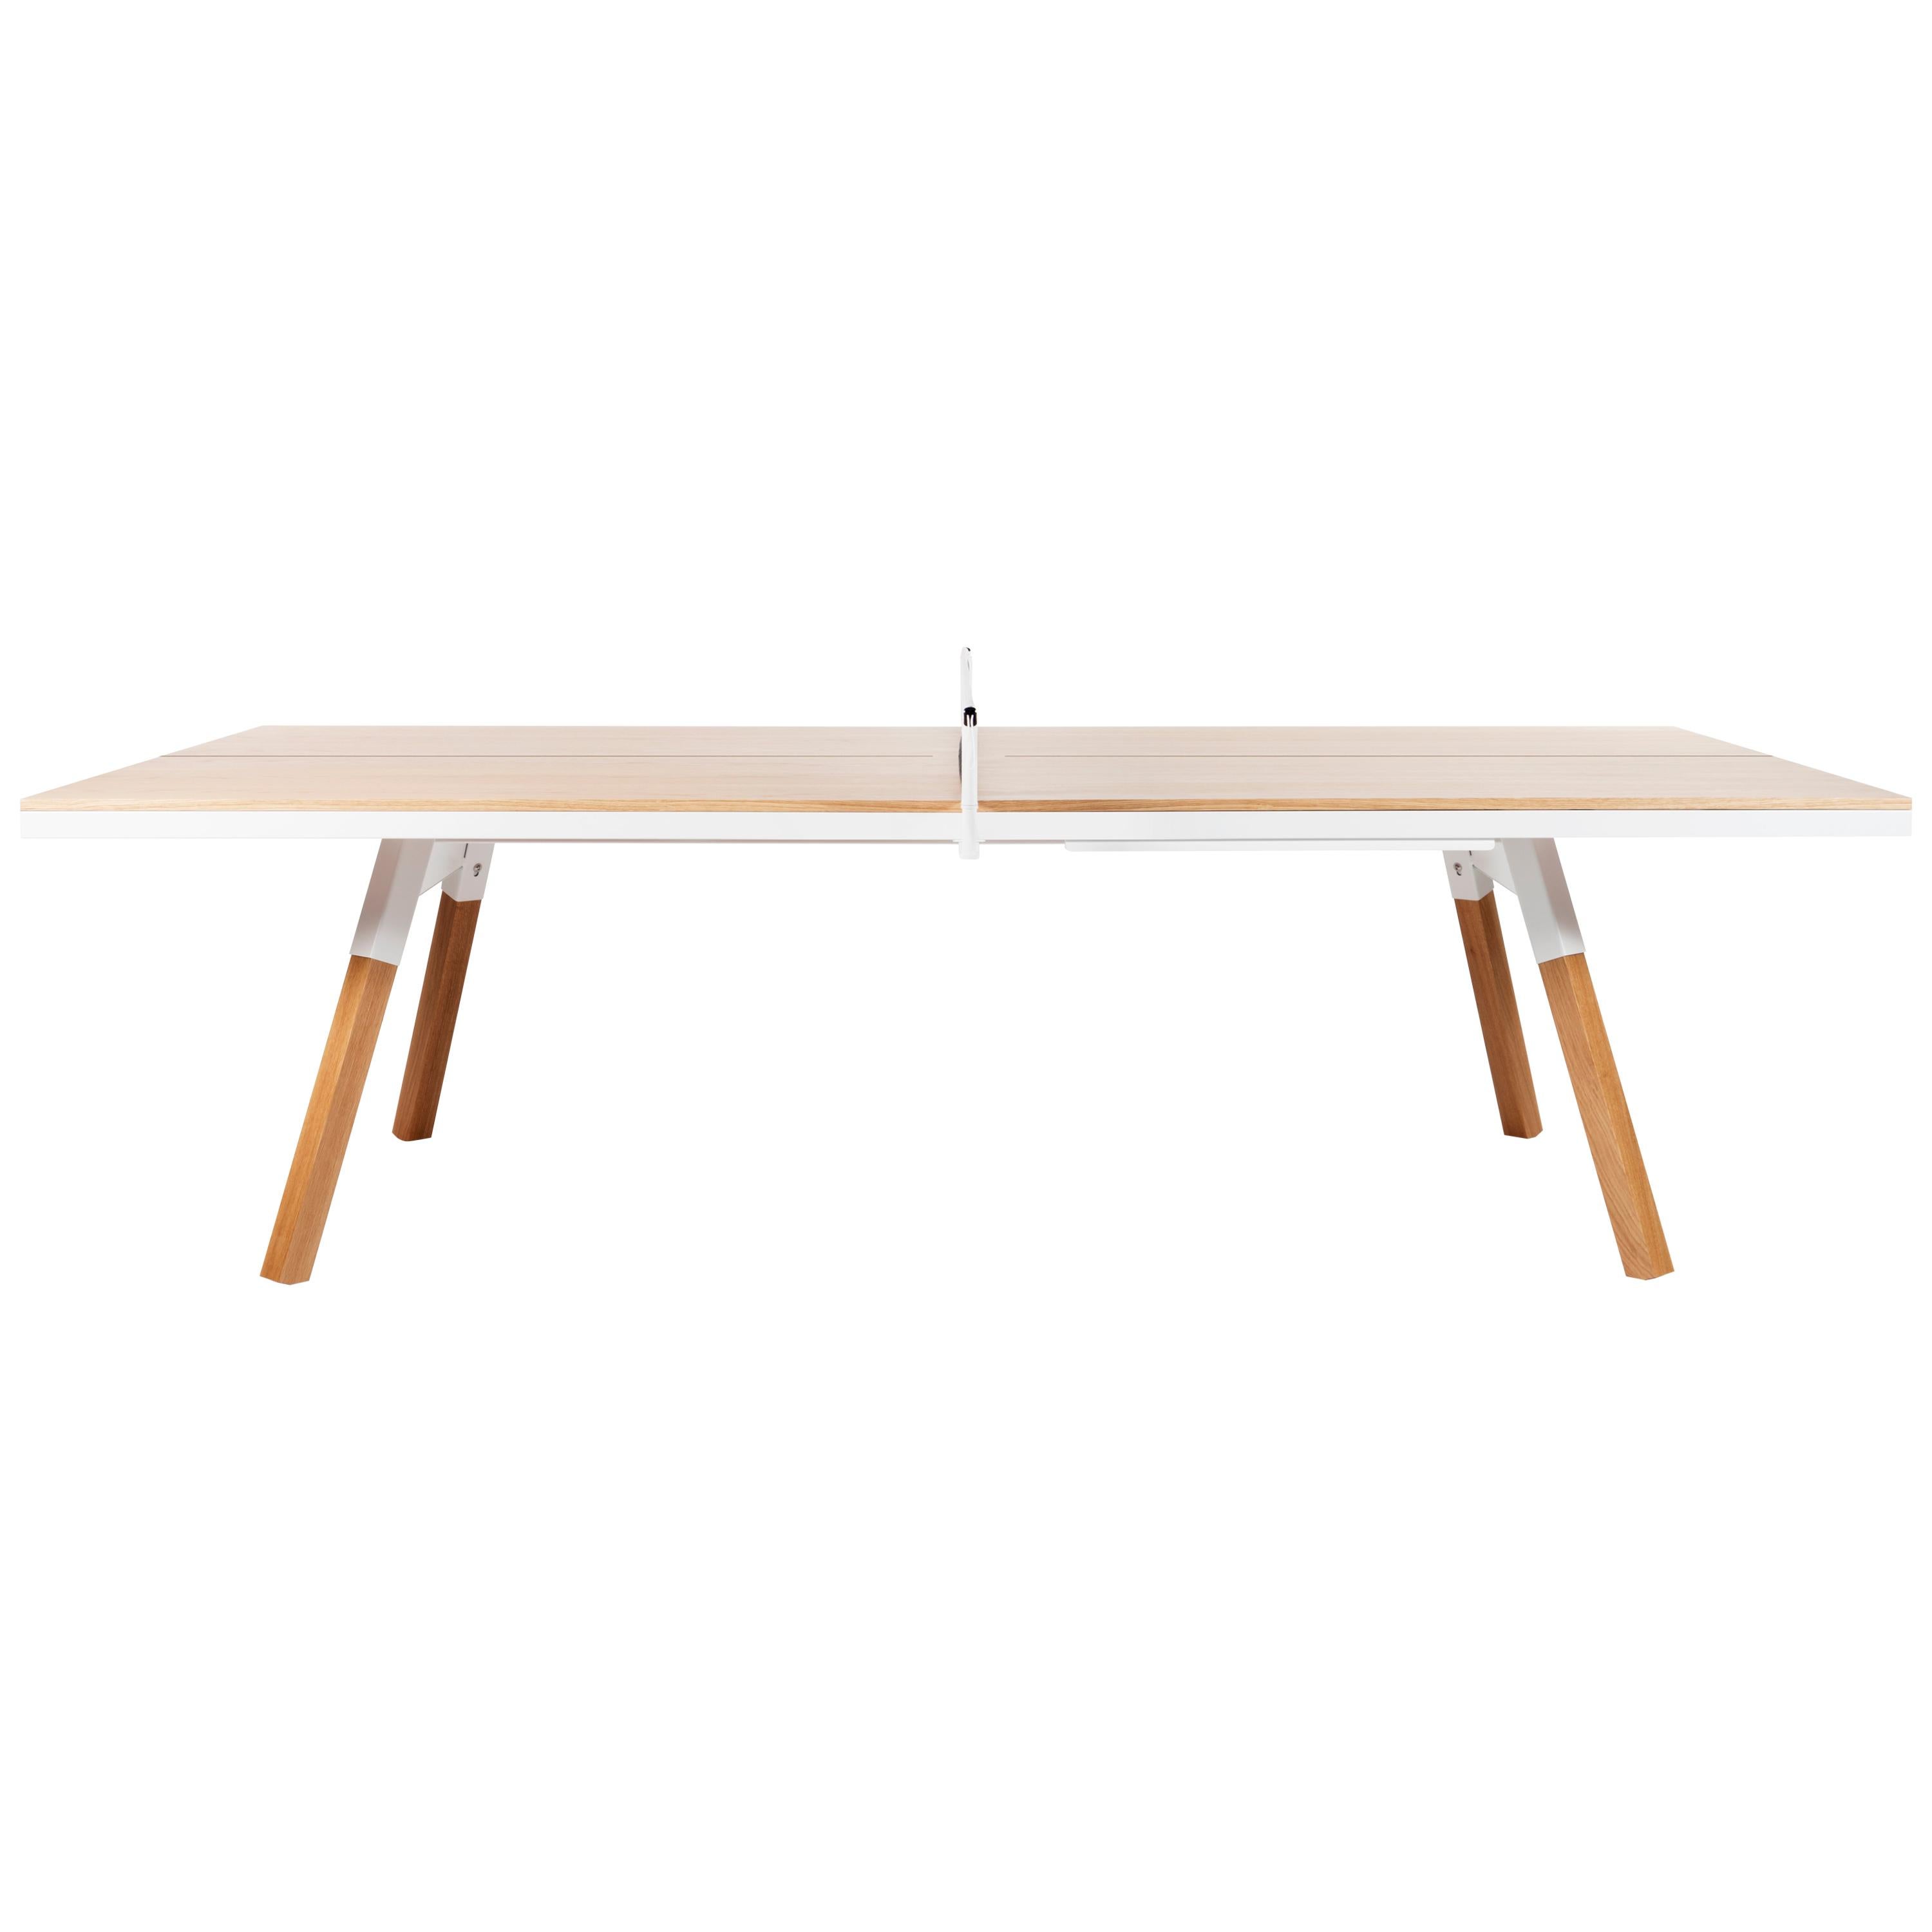 You & Me Wooden Top Standard Ping Pong Table in Oak and White by RS Barcelona For Sale